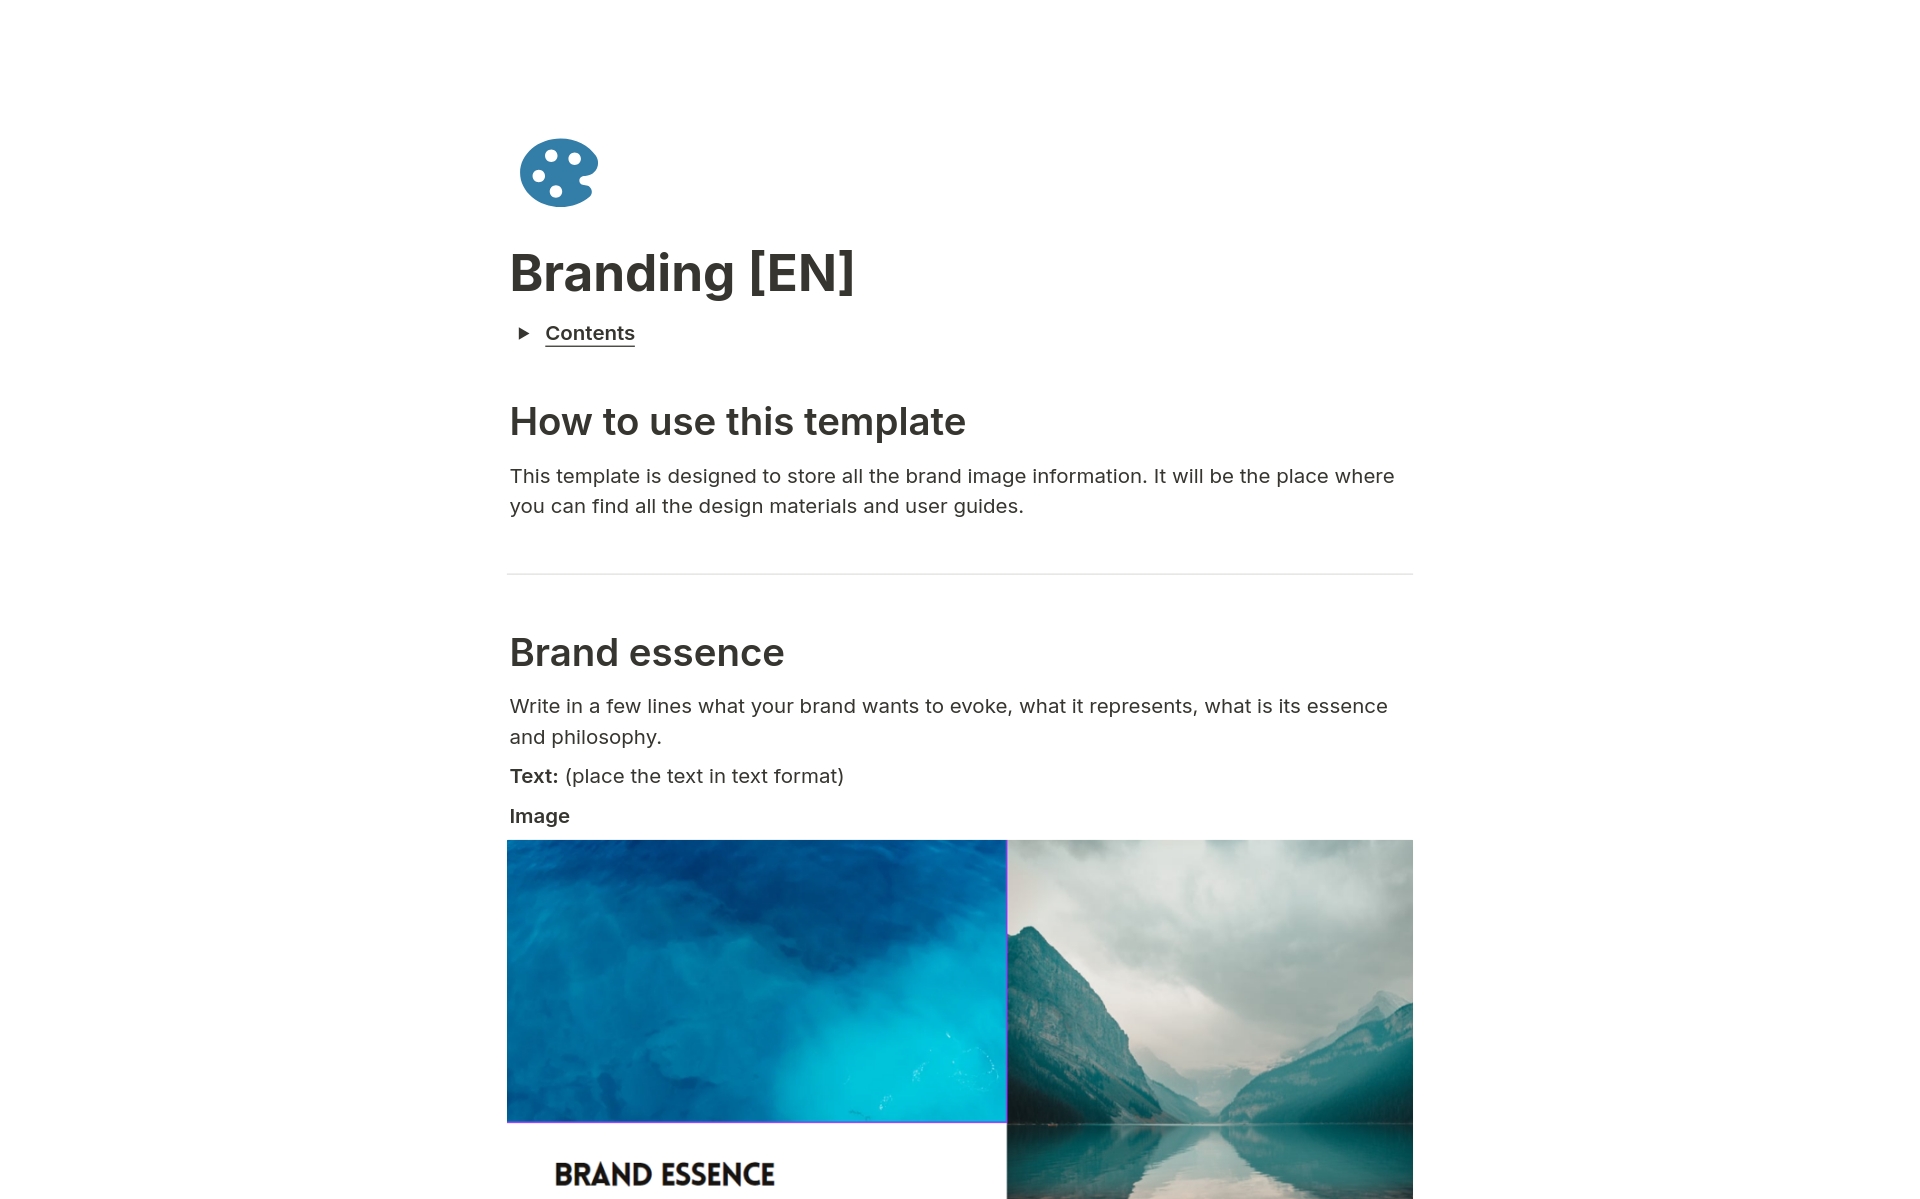 This branding template will be the place to store all the information about your corporate image: logos and their use, fonts, document templates, corporate colors… If you are just starting to create that image, it will serve as a guide to know what elements you need to include.